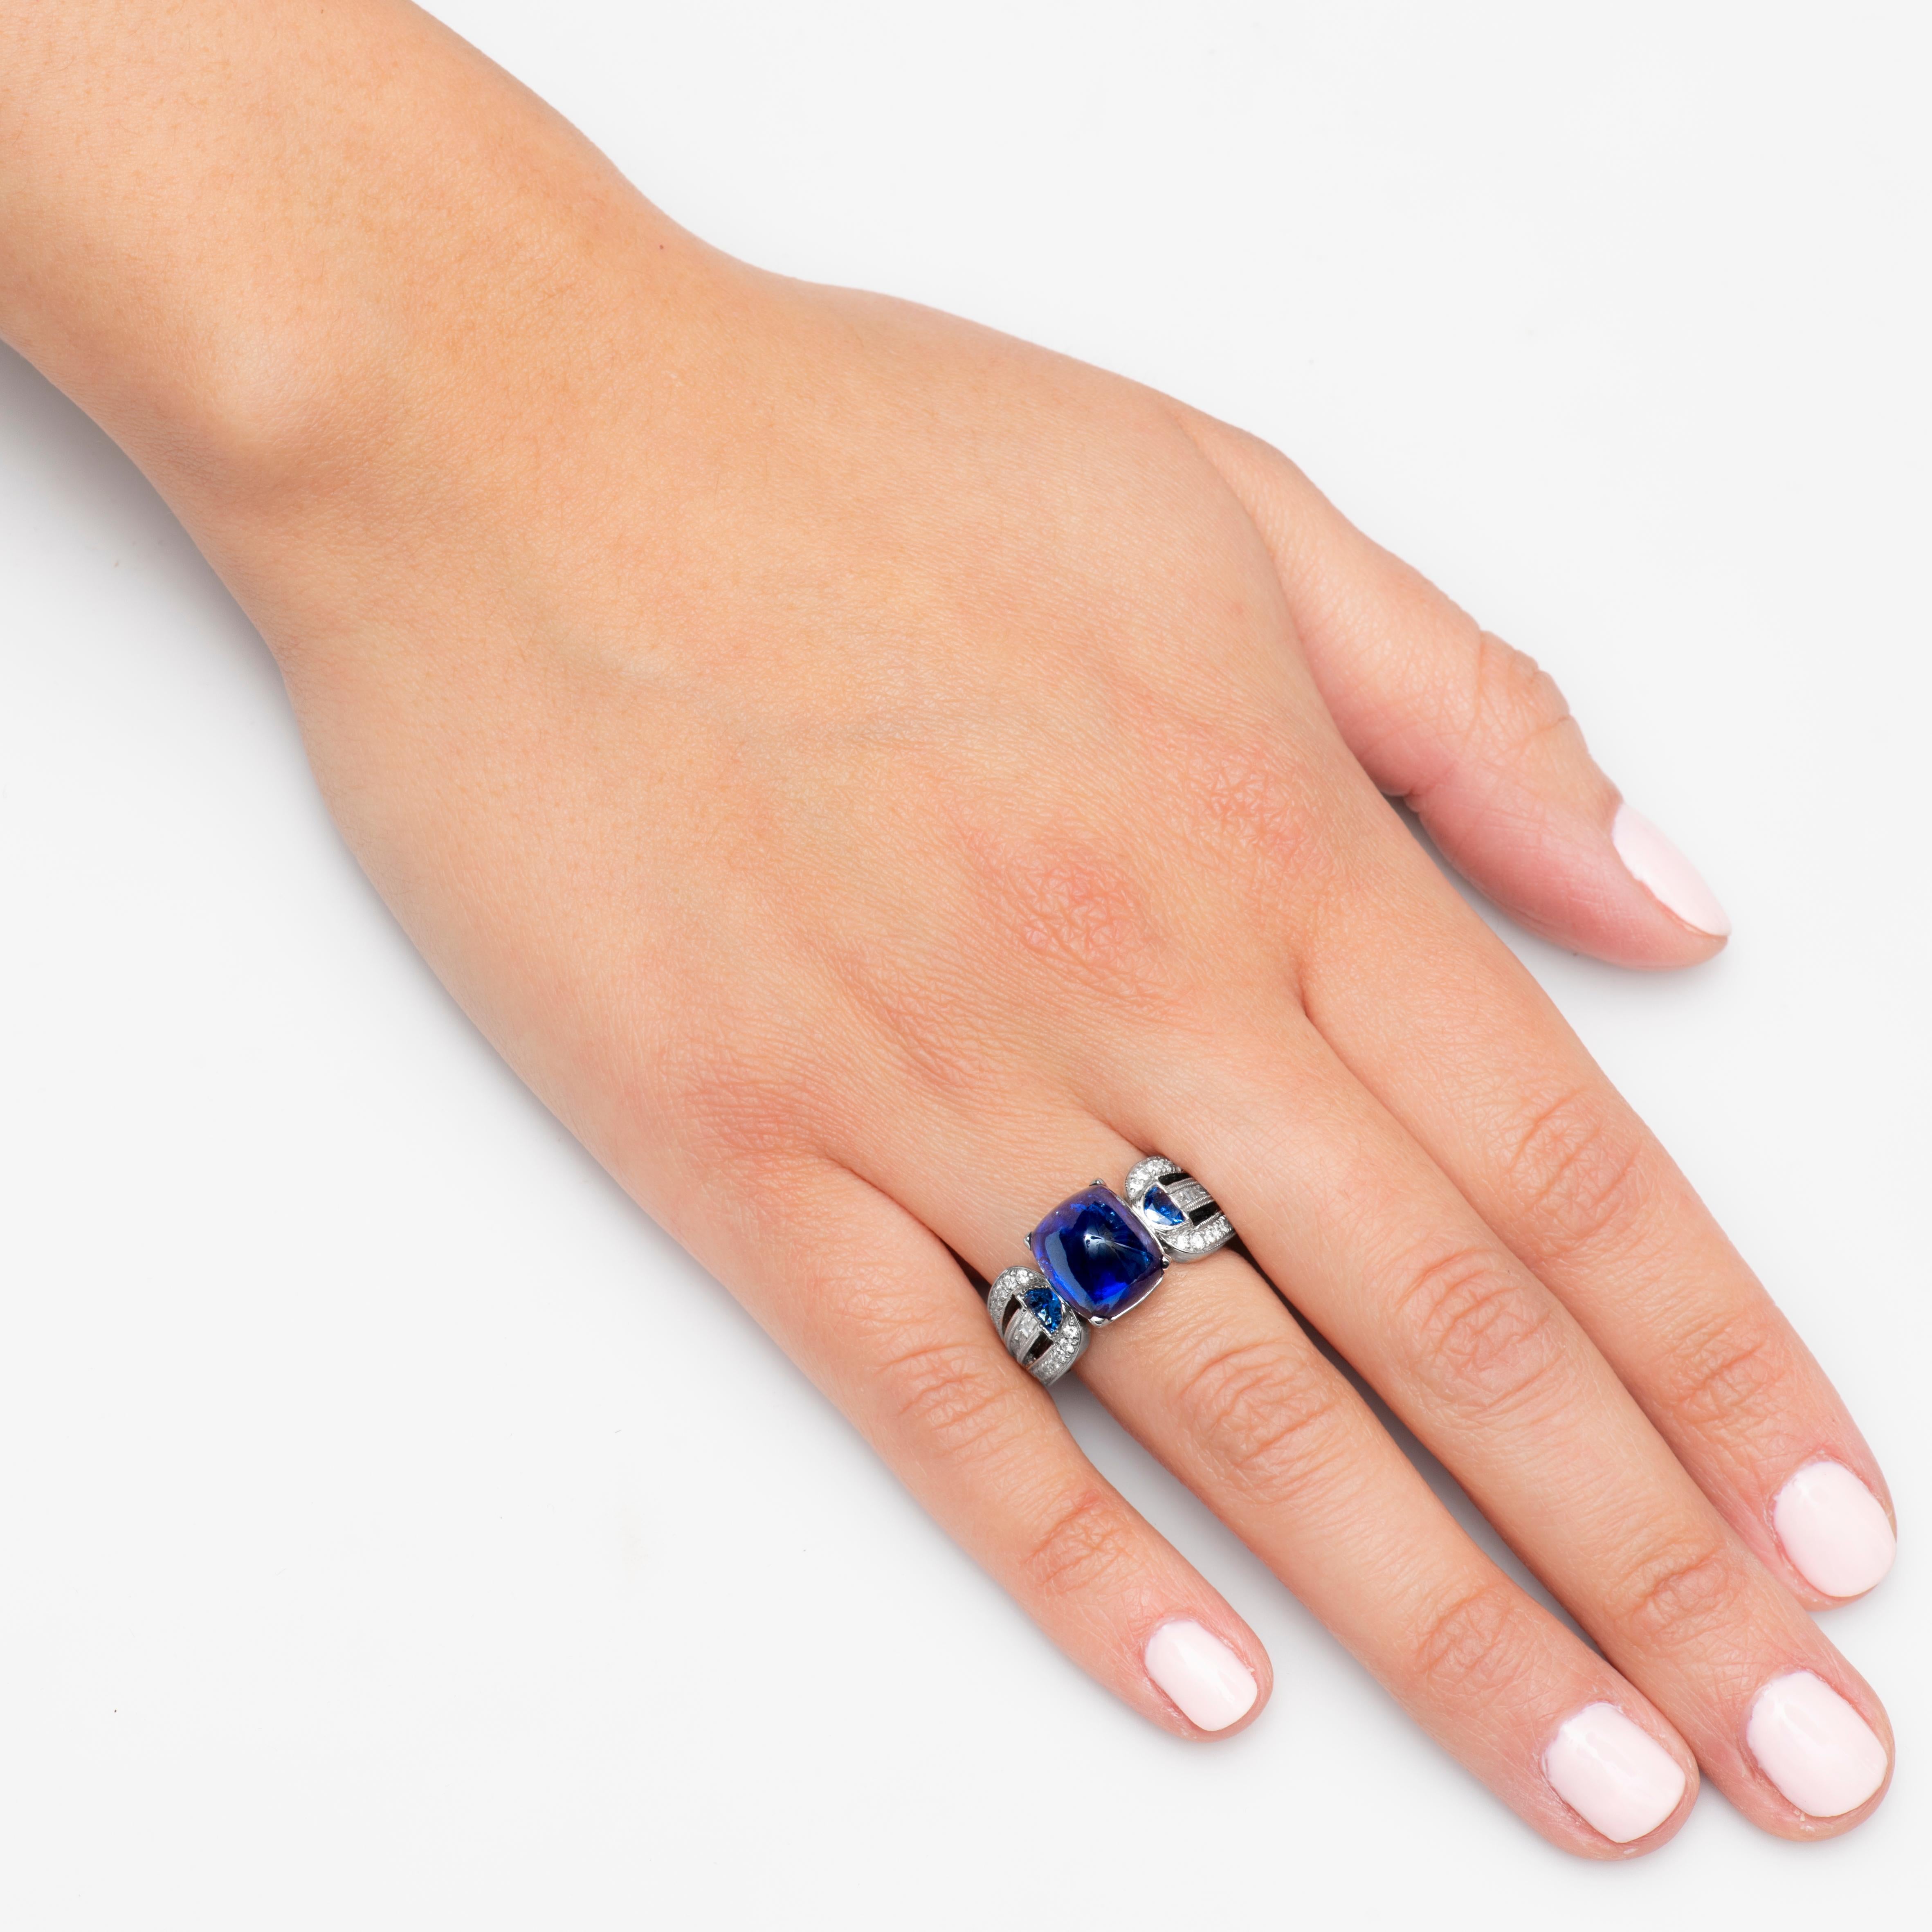 Cushion Cut 9.06 Carat Sugarloaf Cabochon Natural Blue Sapphire Ring with Diamond Accents